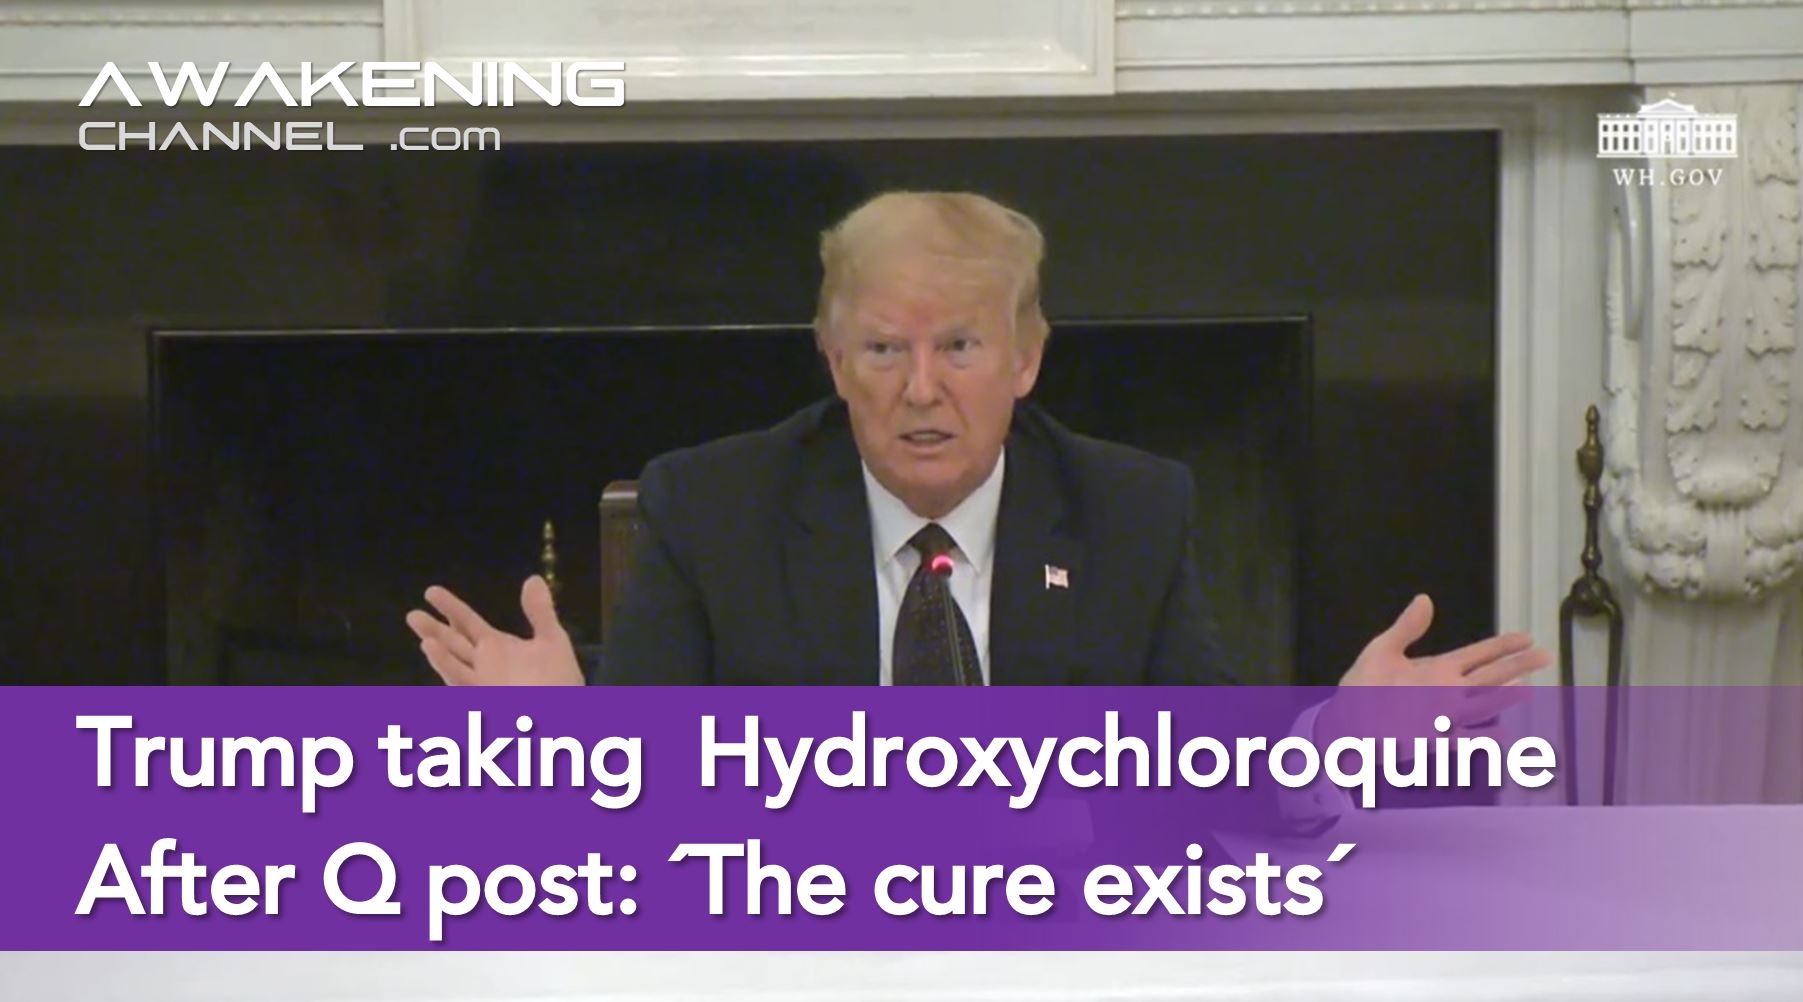 Trump has been taking Hydroxychloroquine for 10 days after Q post.